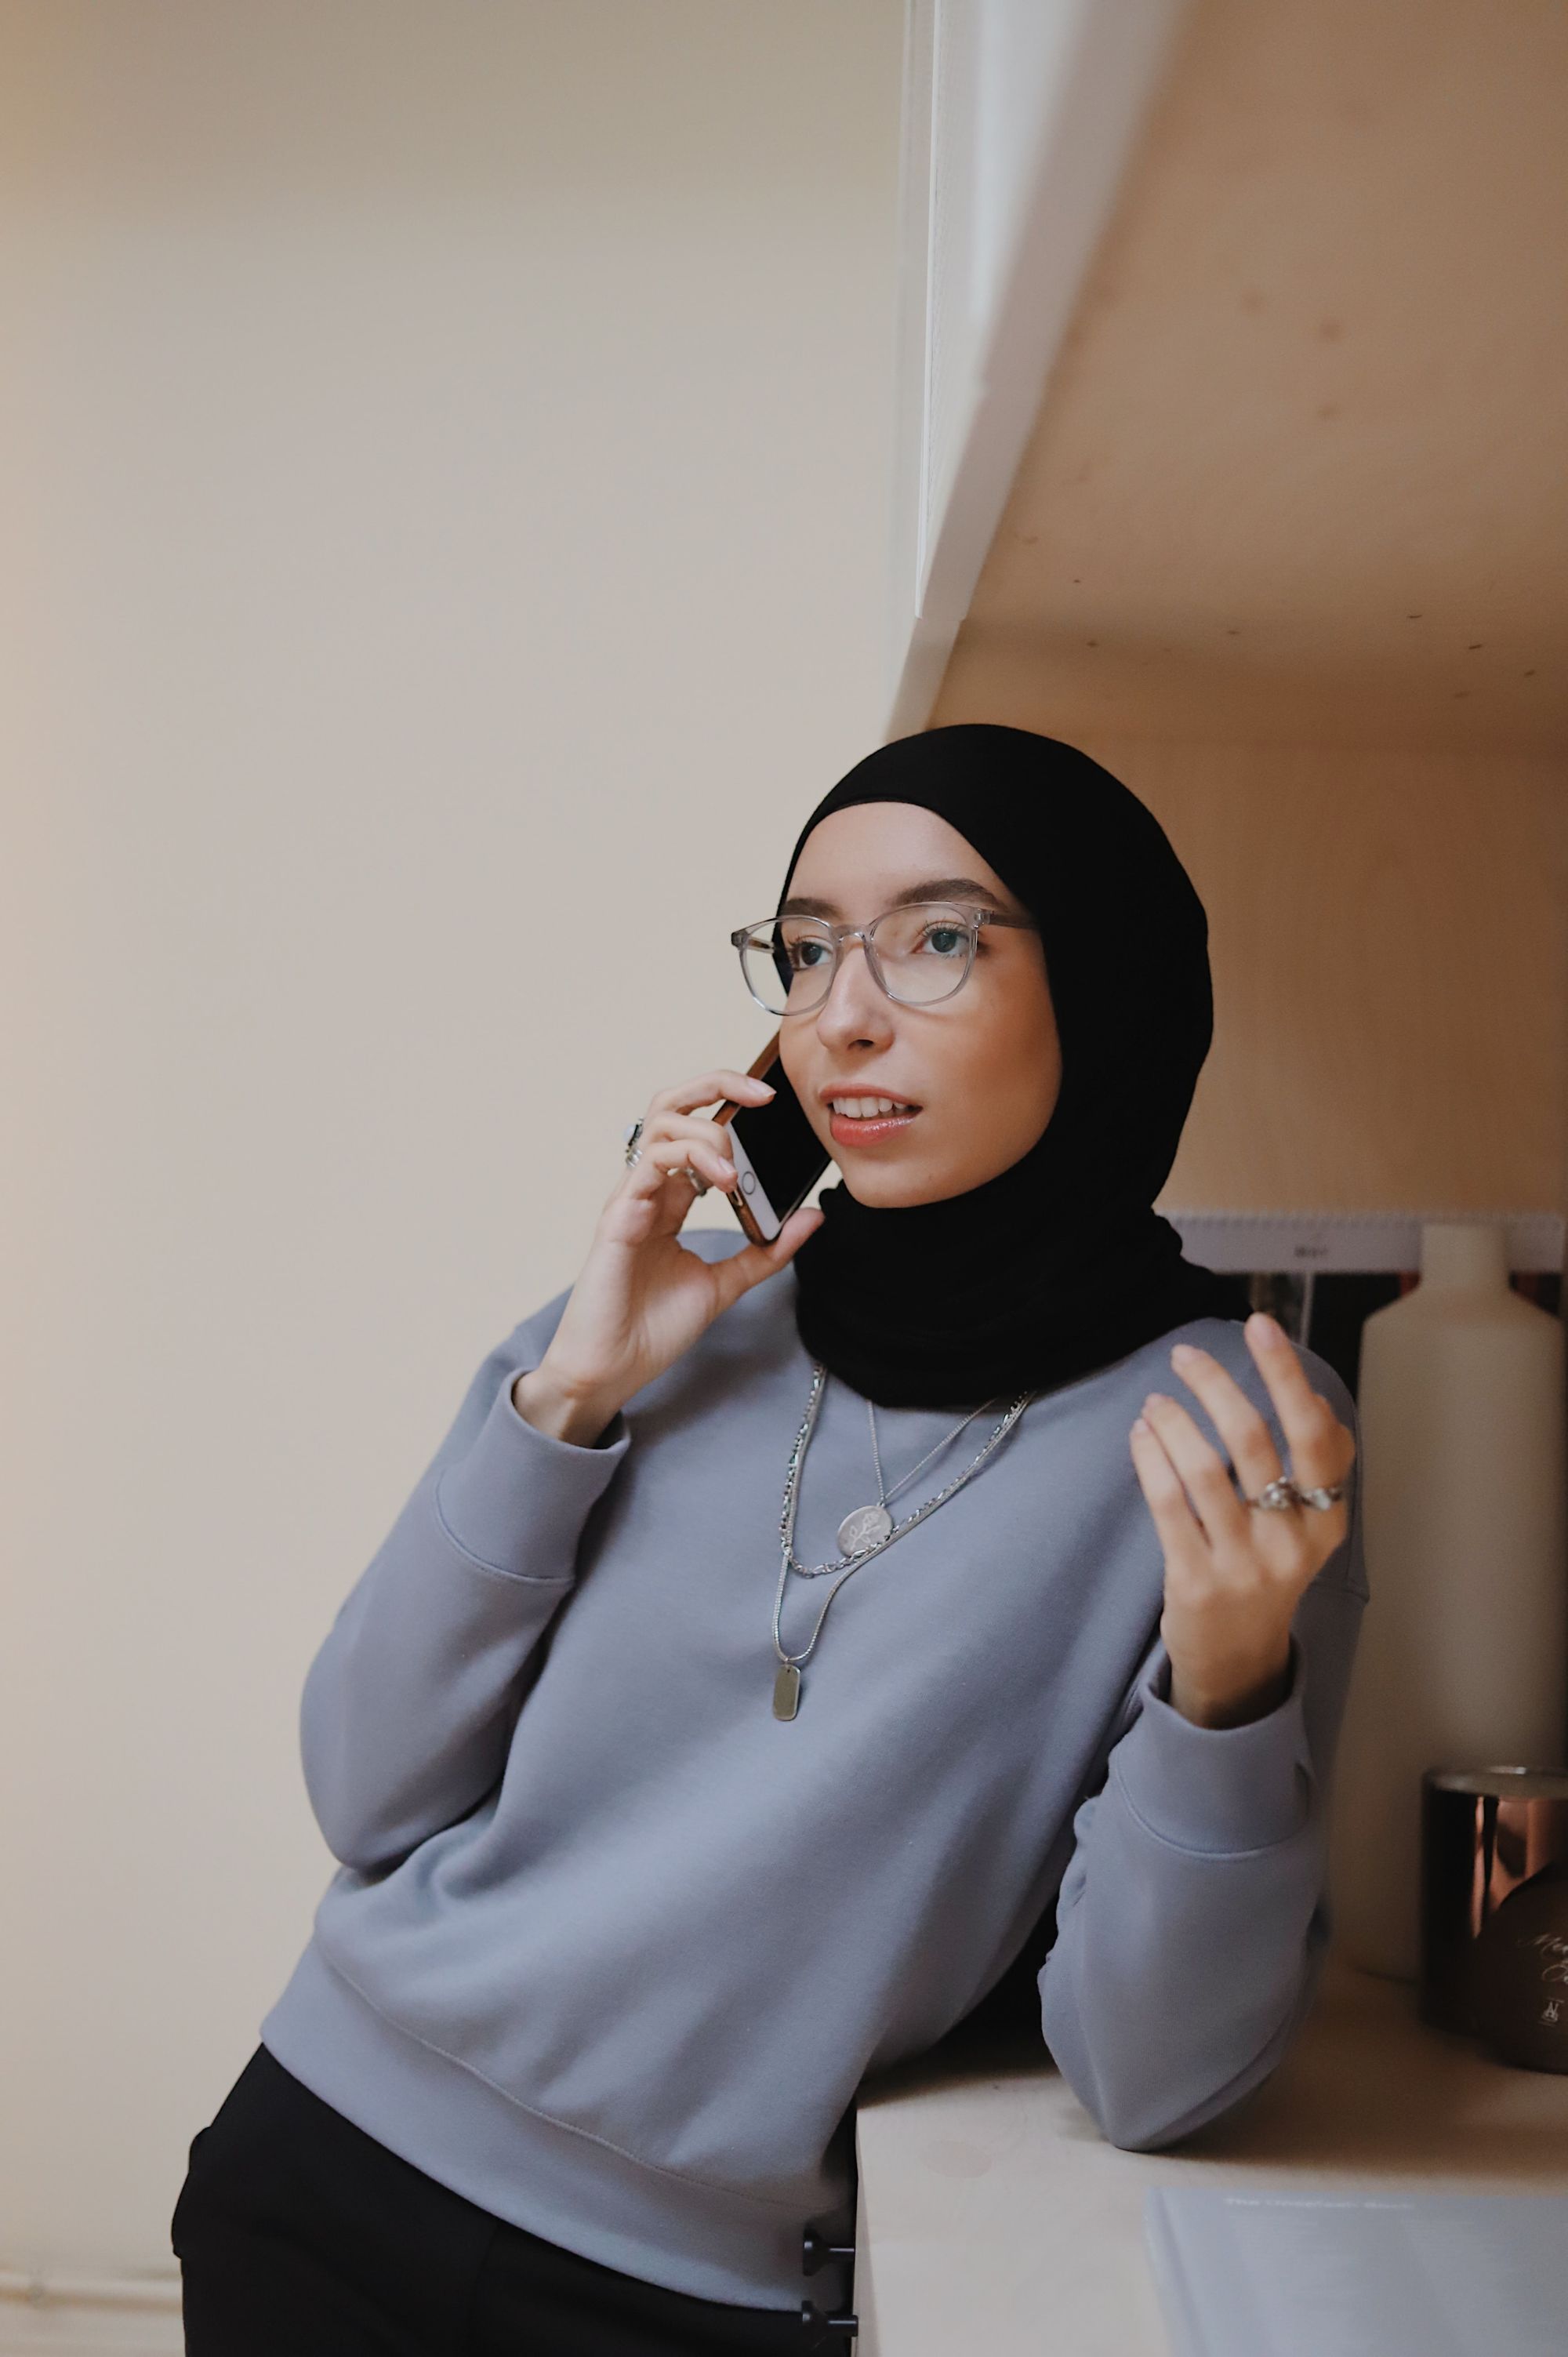 young woman with glasses and a headscarf is talking on the phone.